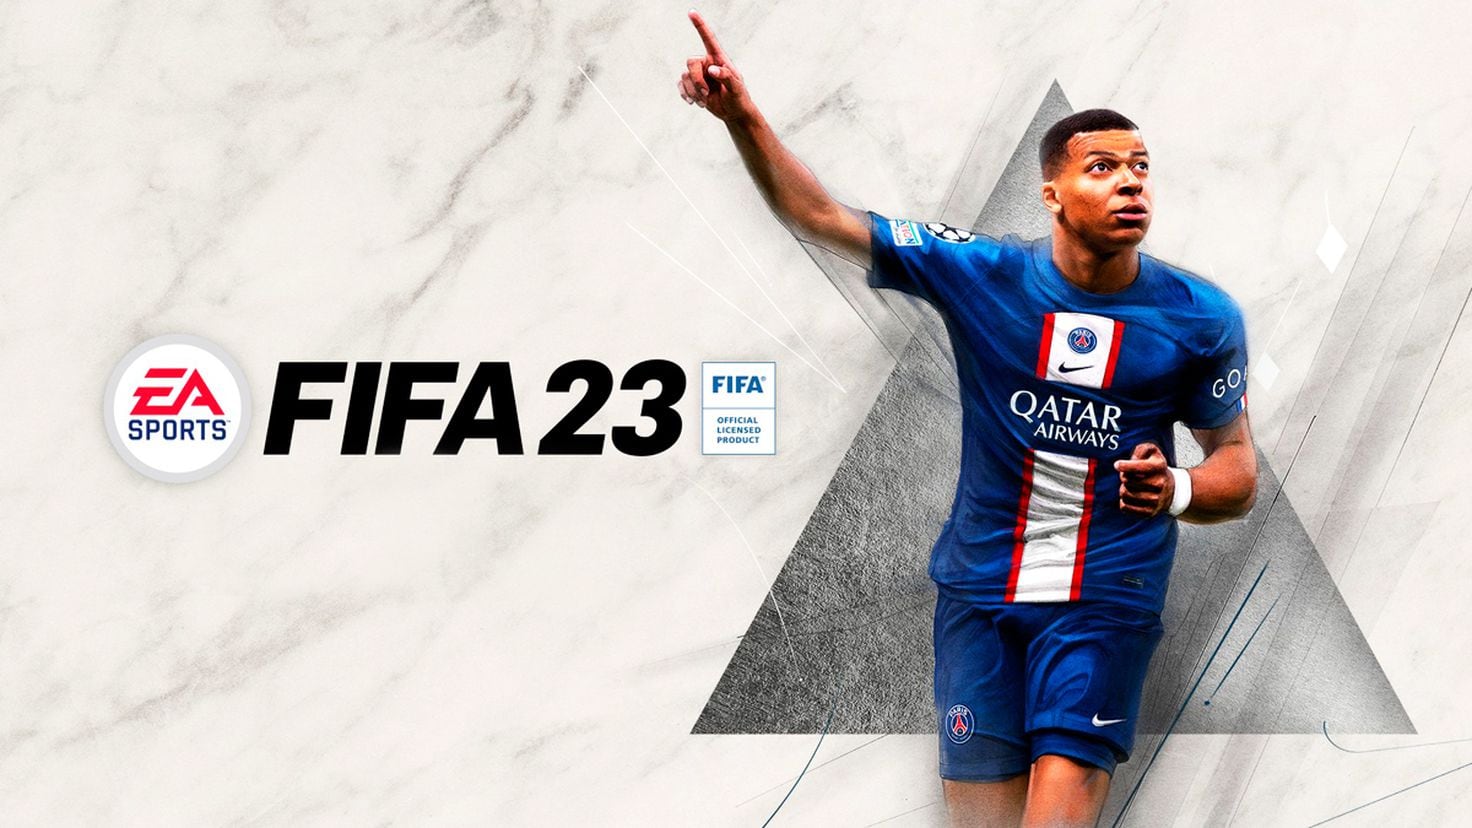 FIFA MOBILE 22 CONFIRMED RELEASE DATE + NEW PLAYERS, UPDATE ON MISSING  PLAYERS